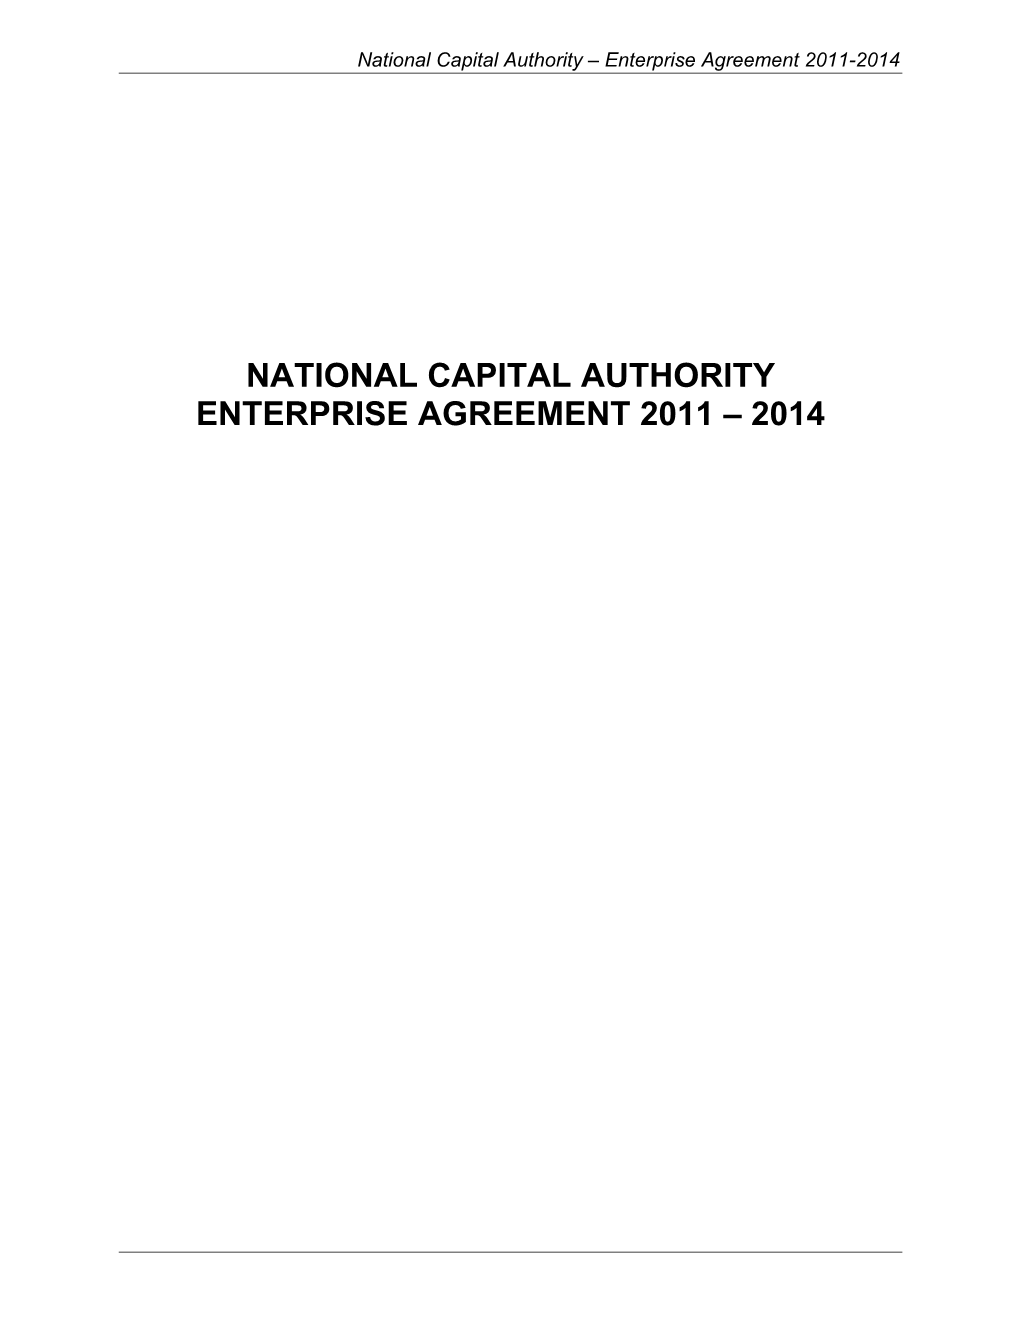 National Capital Authority Certified Agreement 2006-2008